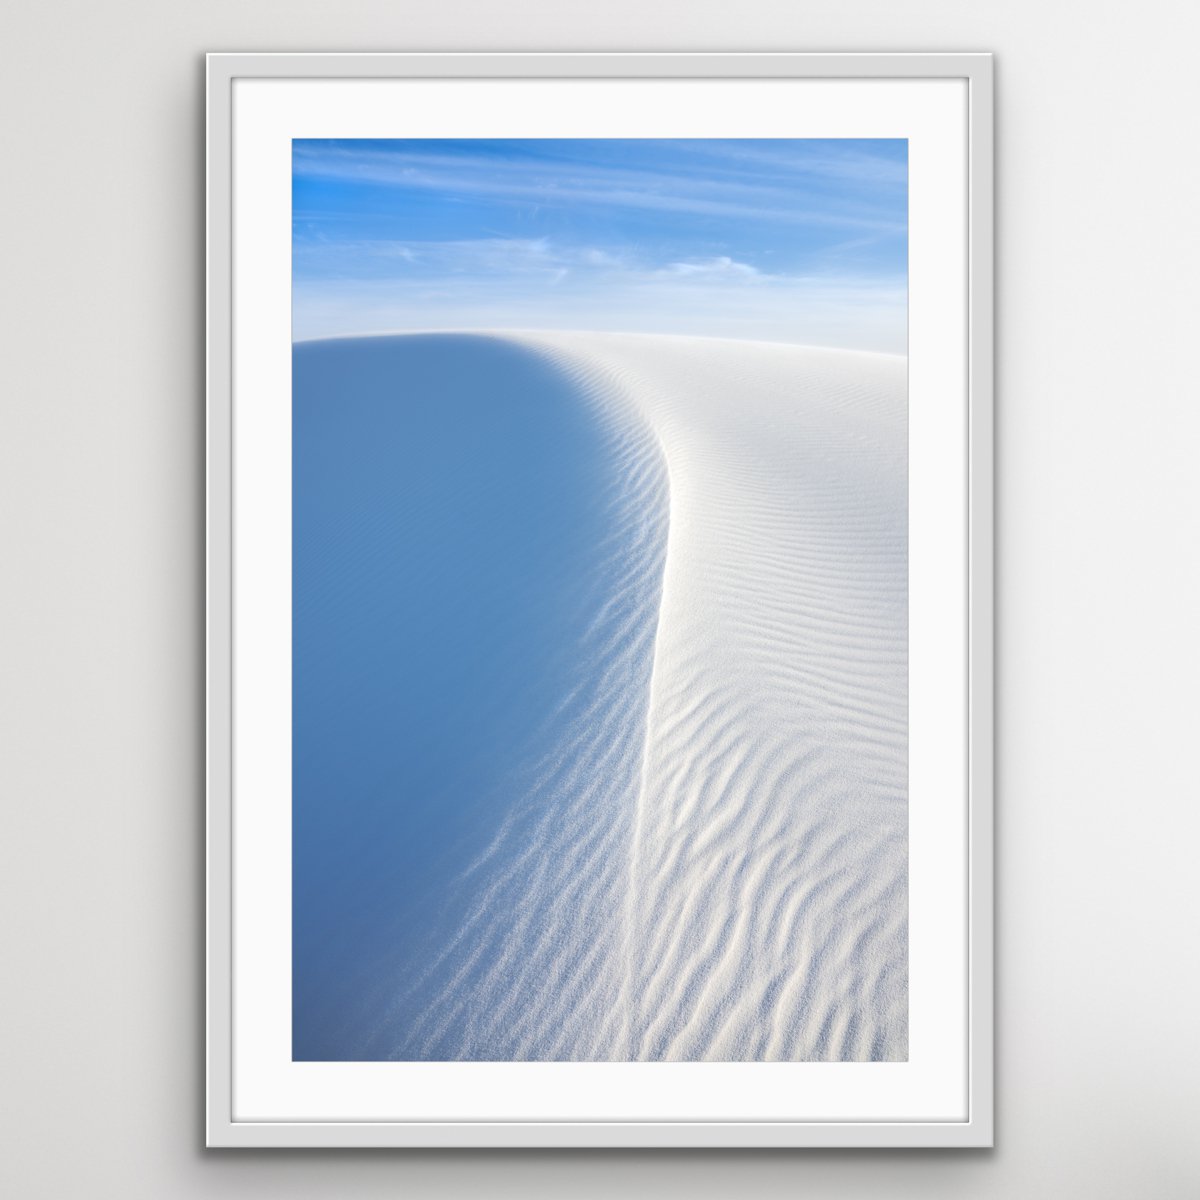 White Wave, White Sands - FRAMED - Limited Edition by Francesco Carucci